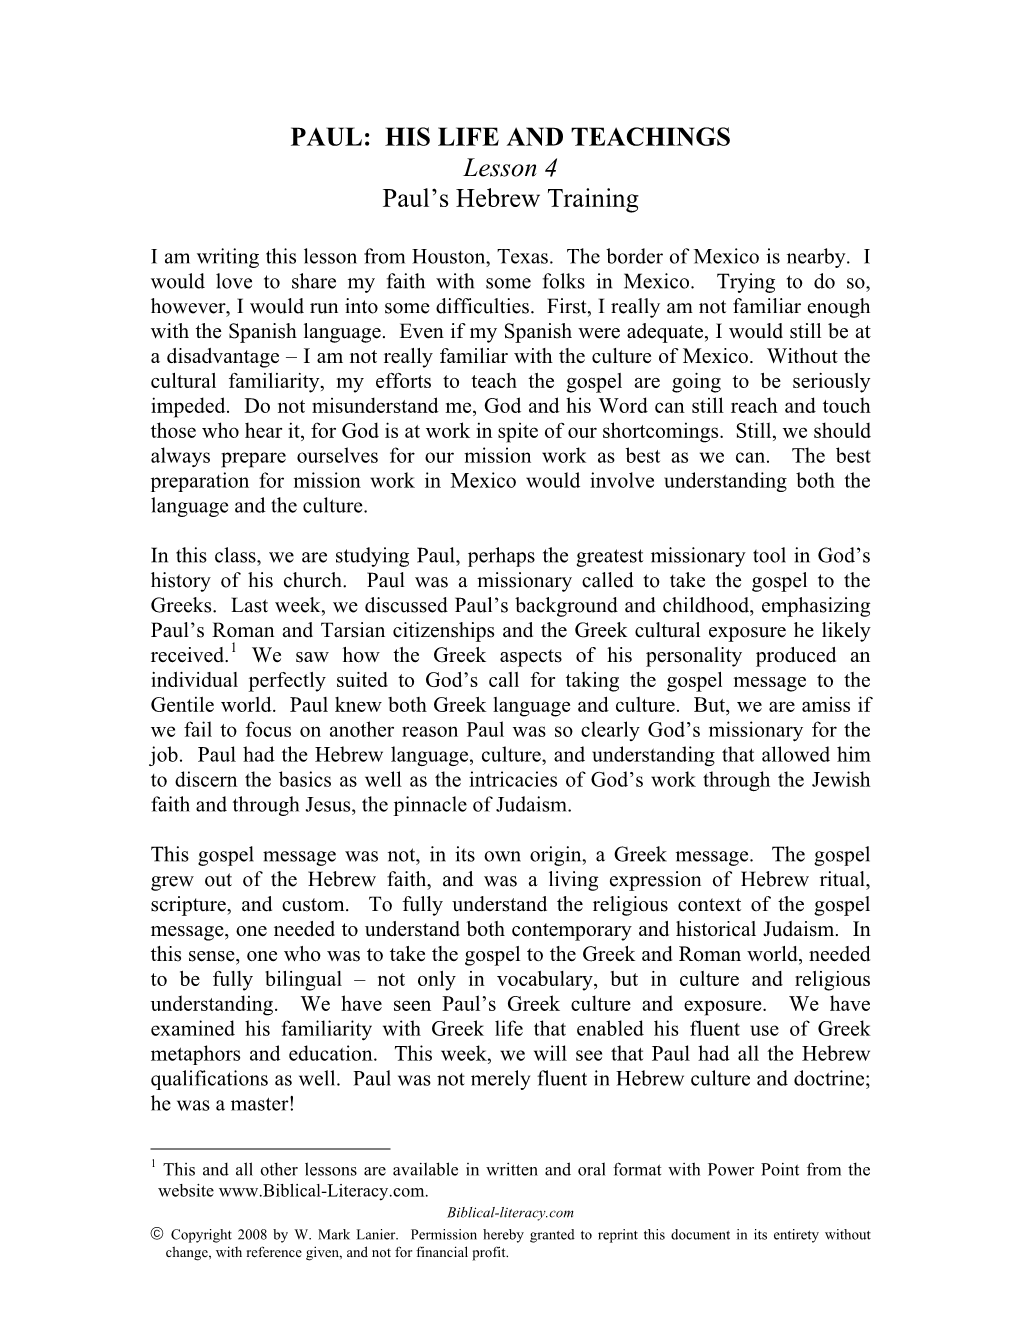 PAUL: HIS LIFE and TEACHINGS Lesson 4 Paul’S Hebrew Training